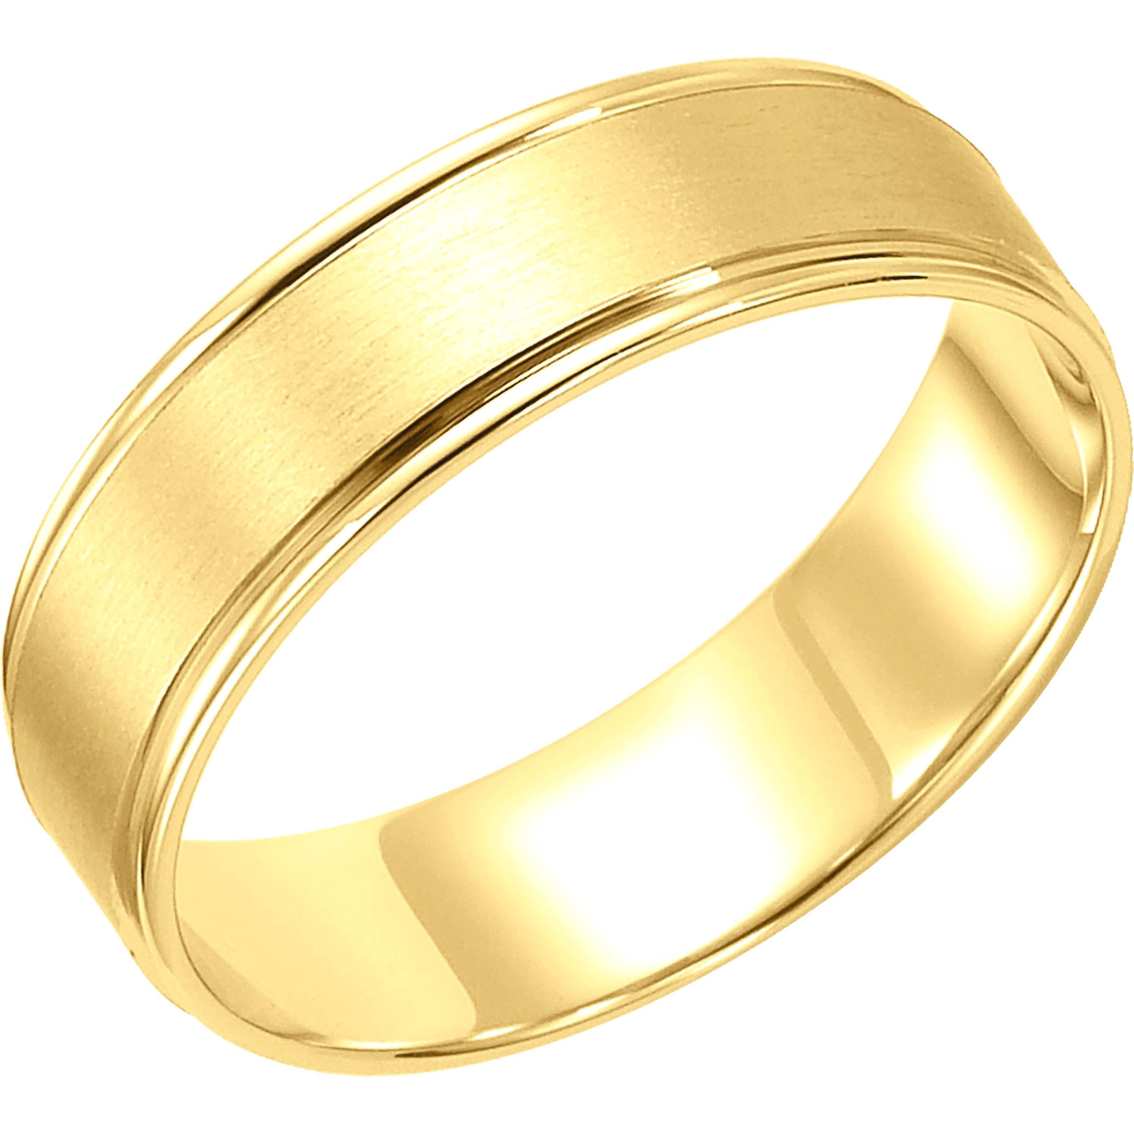 14K Yellow Gold Engraved 6mm Band - Image 2 of 2